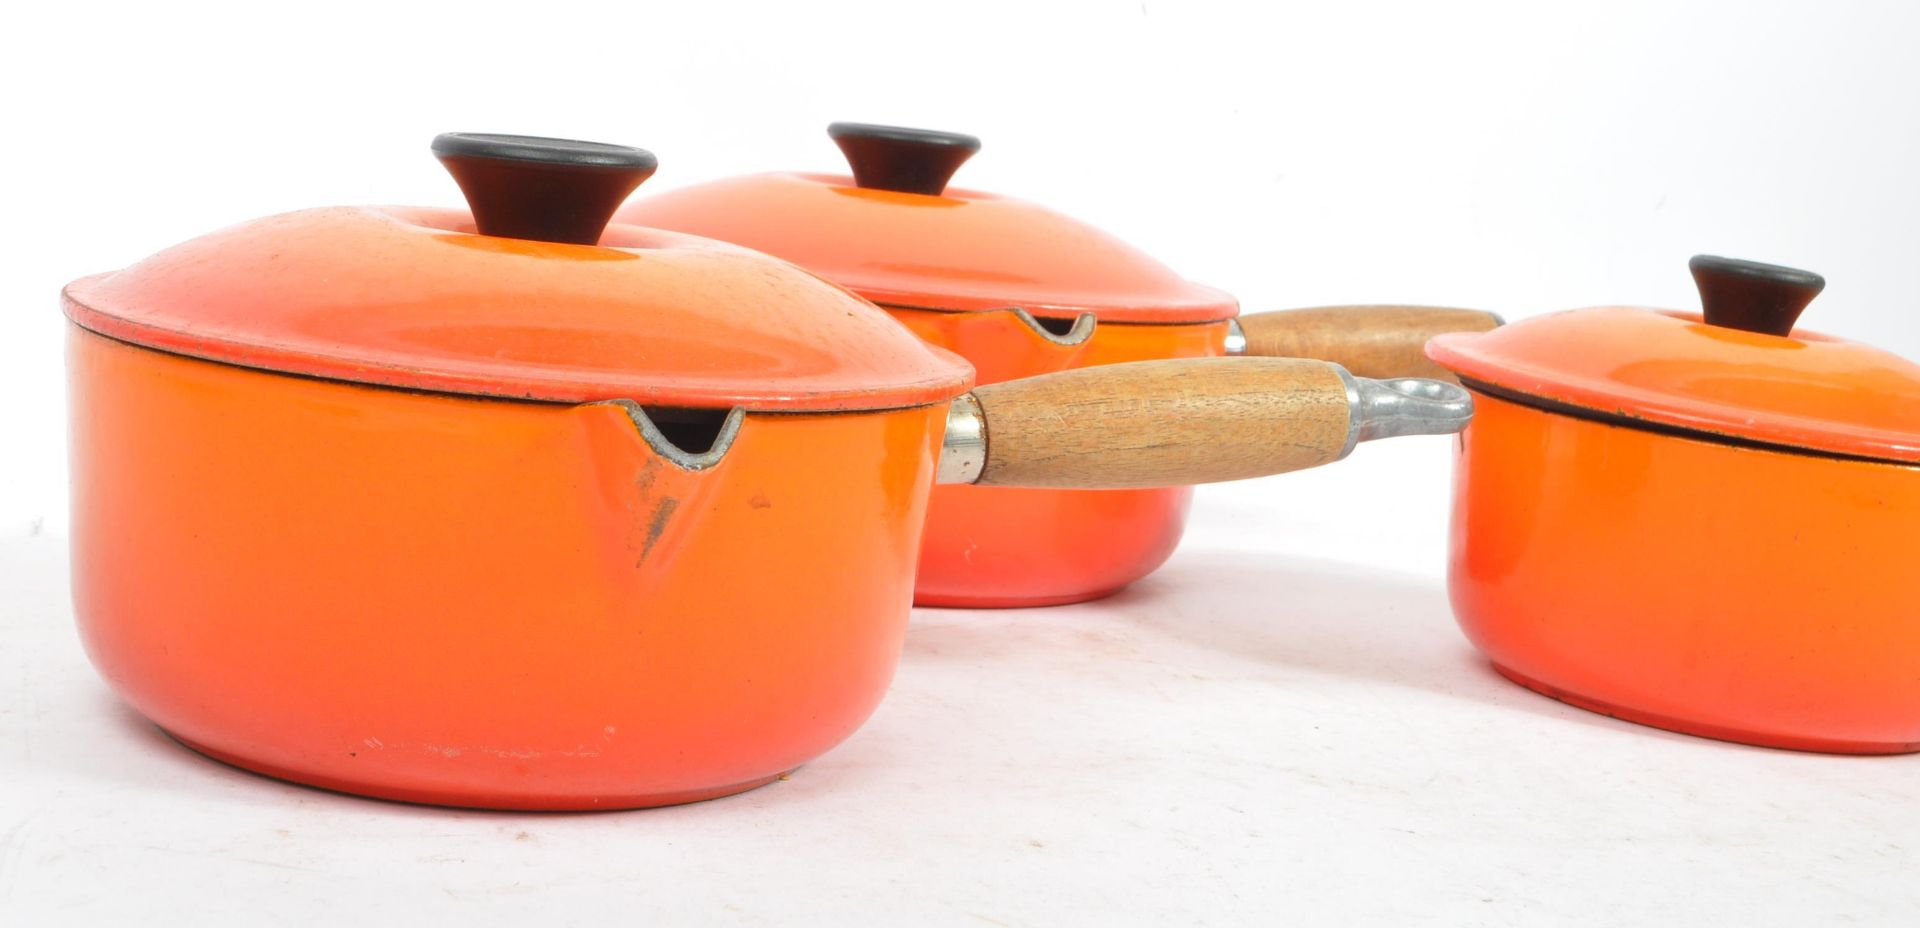 LE CREUSET - COLLECTION OF 20TH CENTURY COOKWARE - Image 7 of 7